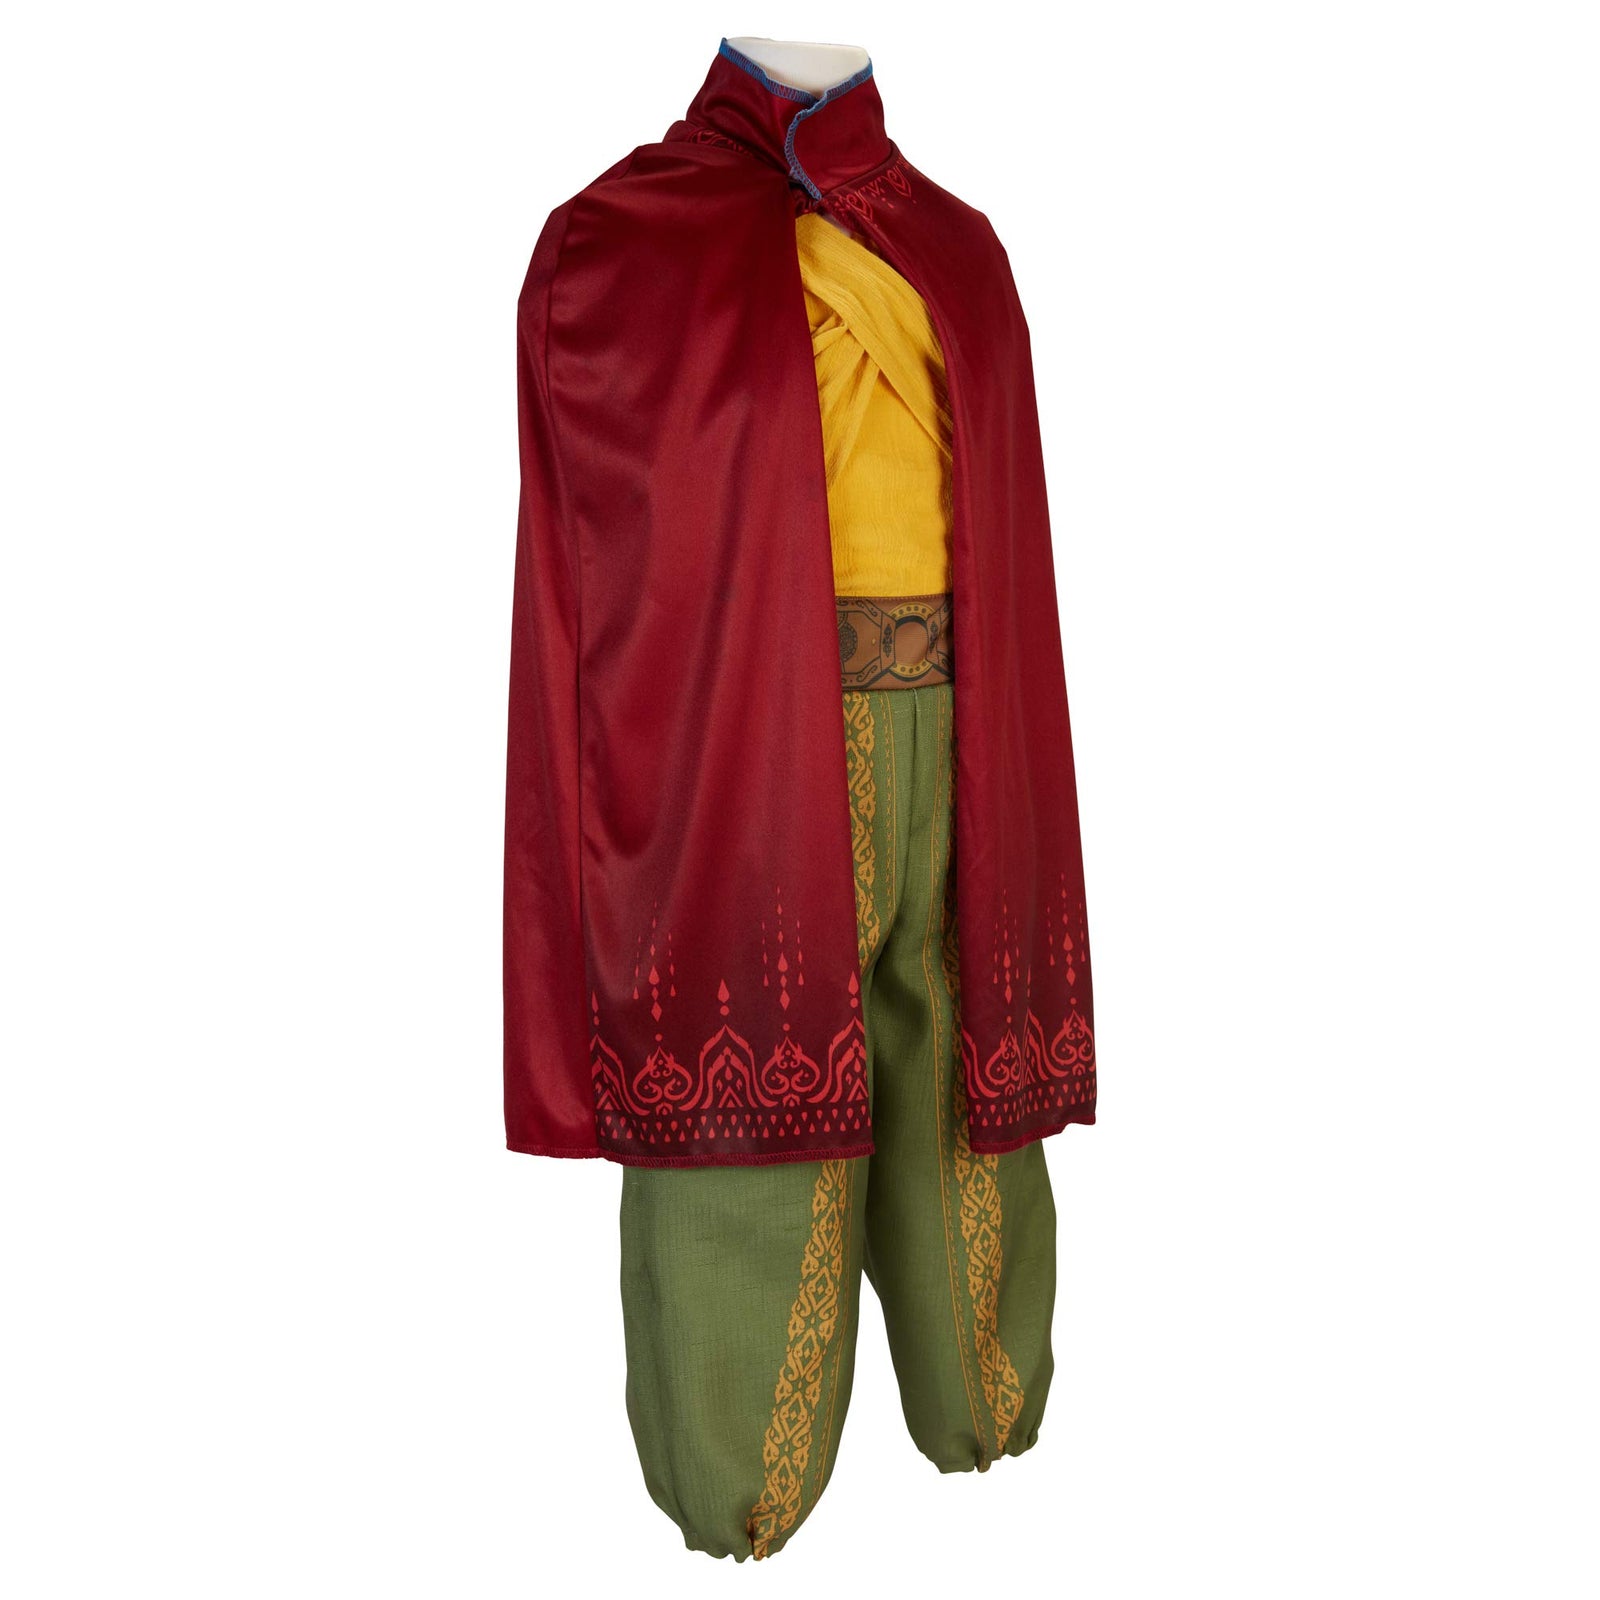 Disney Raya Warrior Costume Outfit with Cape for Girls Size 4-6X [Amazon Exclusive] Brown